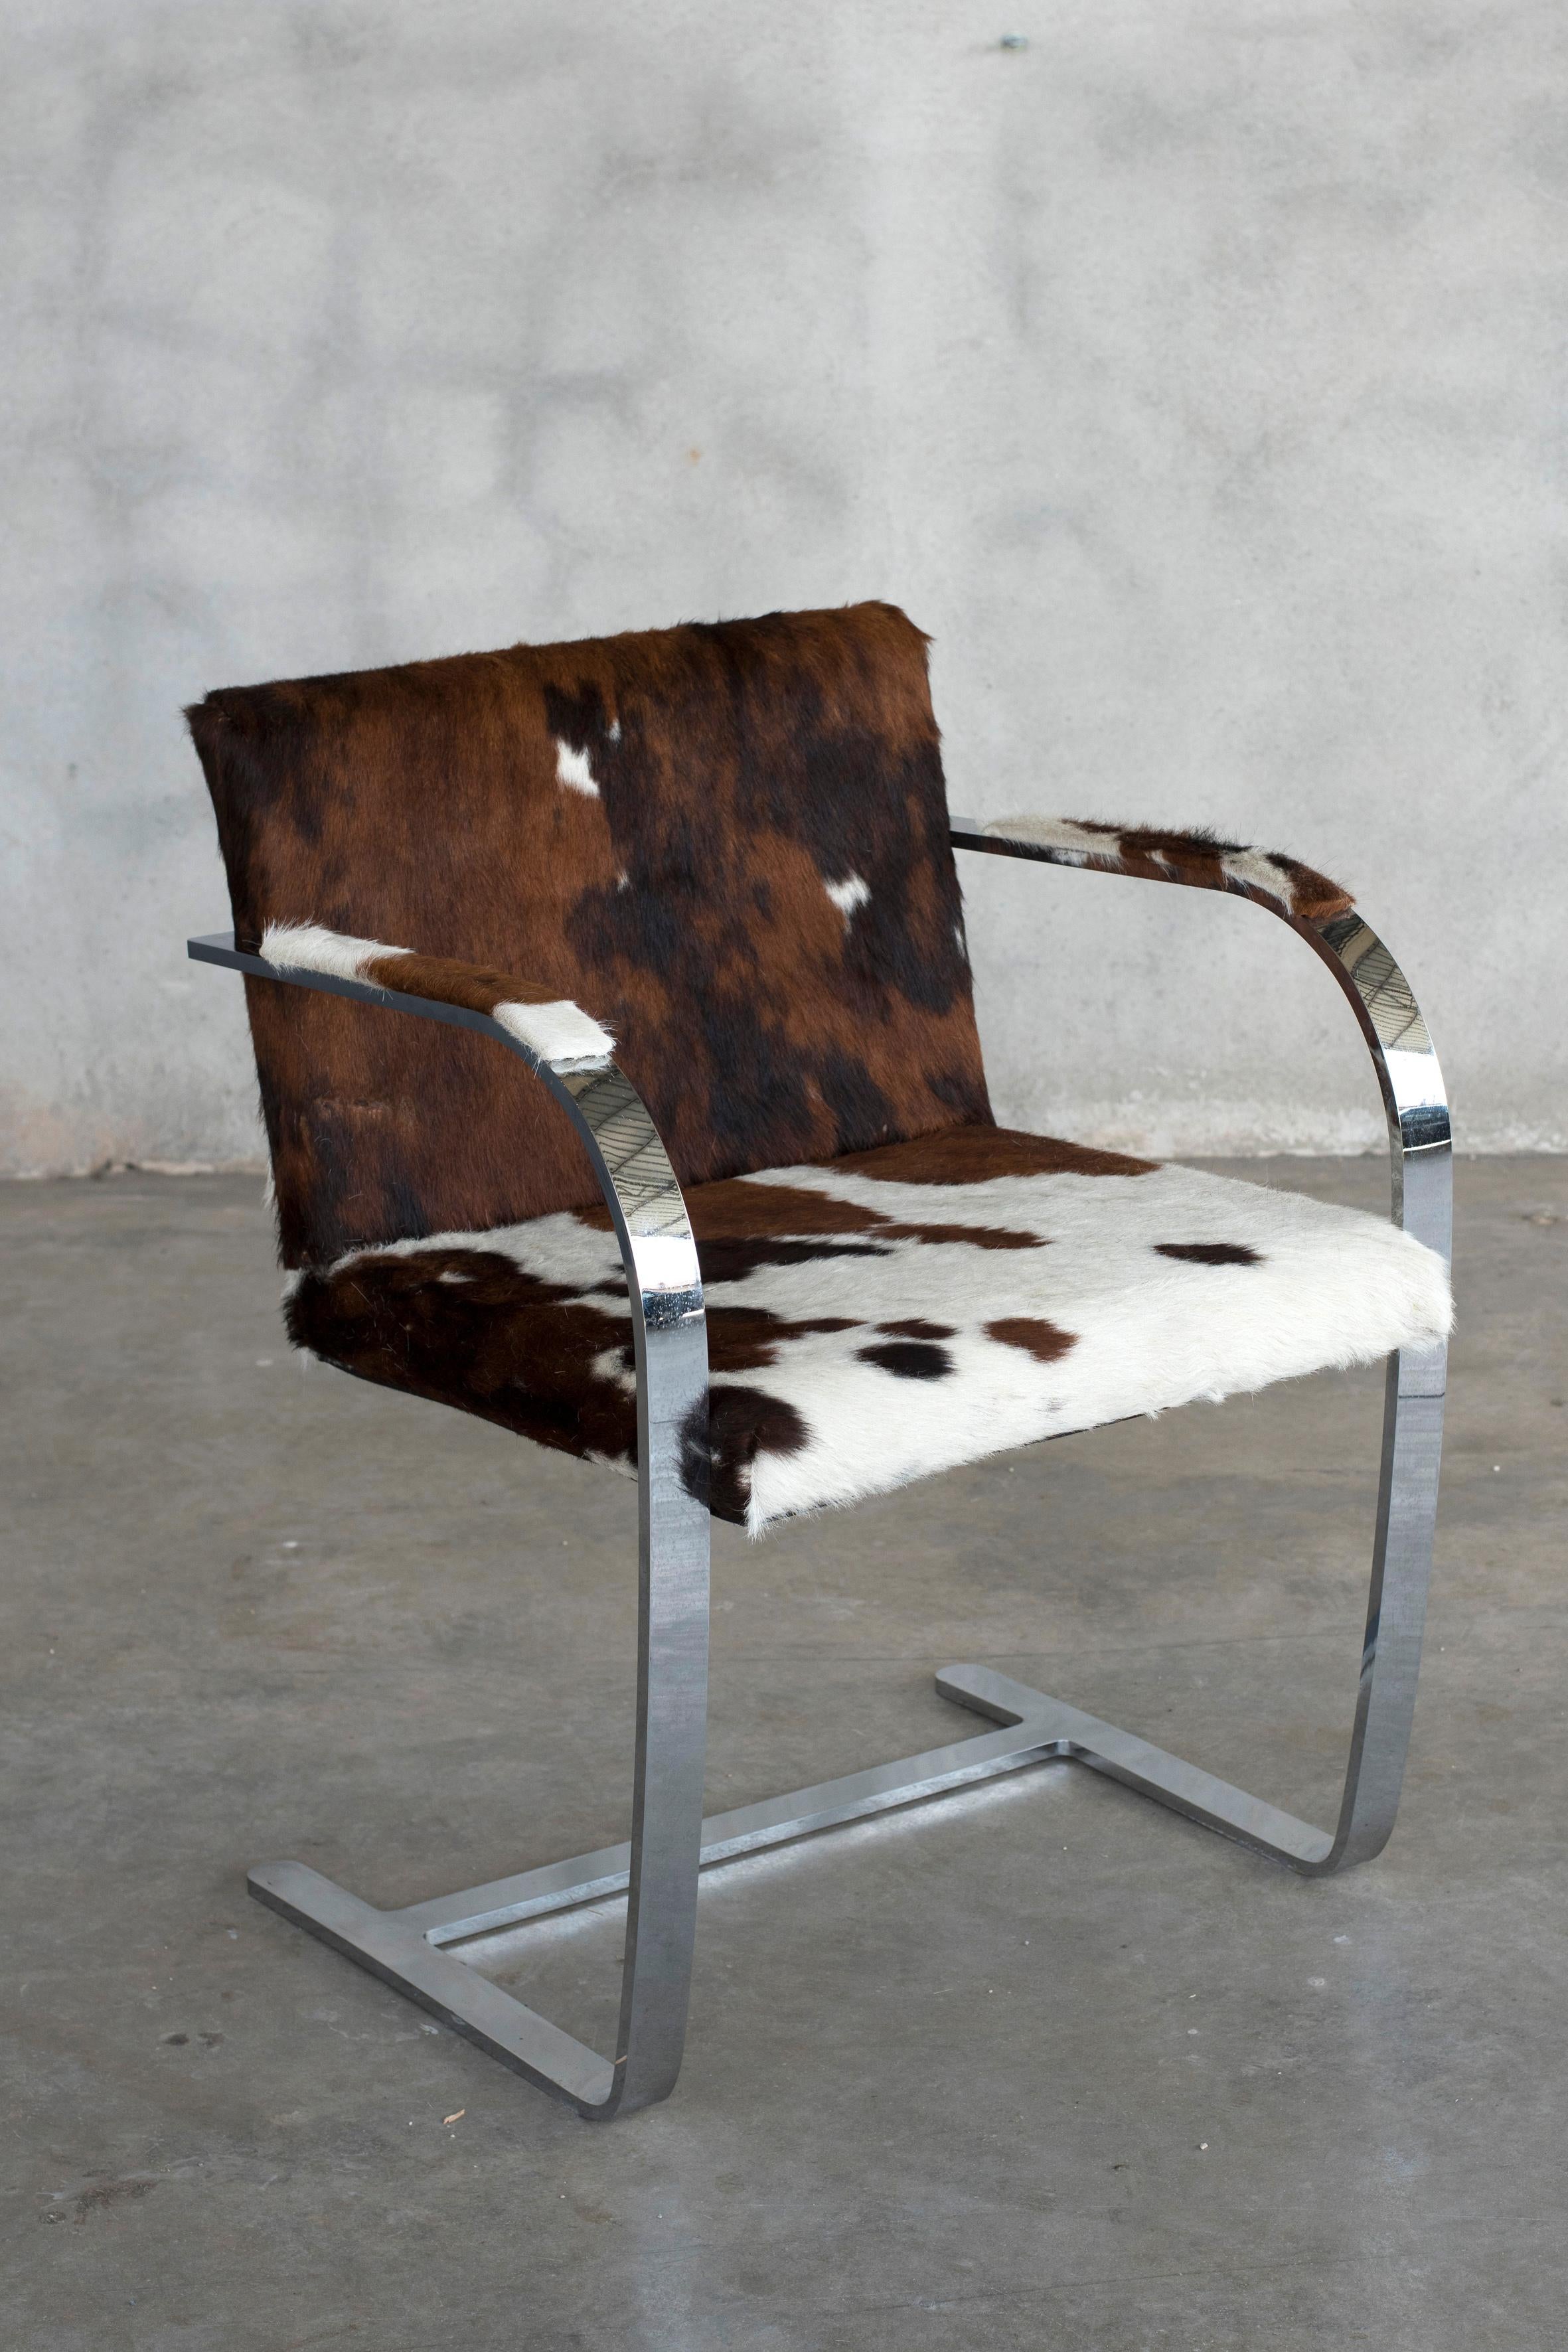 Mies van der Rohe chromed steel Knoll Int. Cow fur brno chair. Two available. Price per chair.
This chair has been recently reupholstered in cow fur. Labelled with a tag of Knoll International 
Size: W 22.75